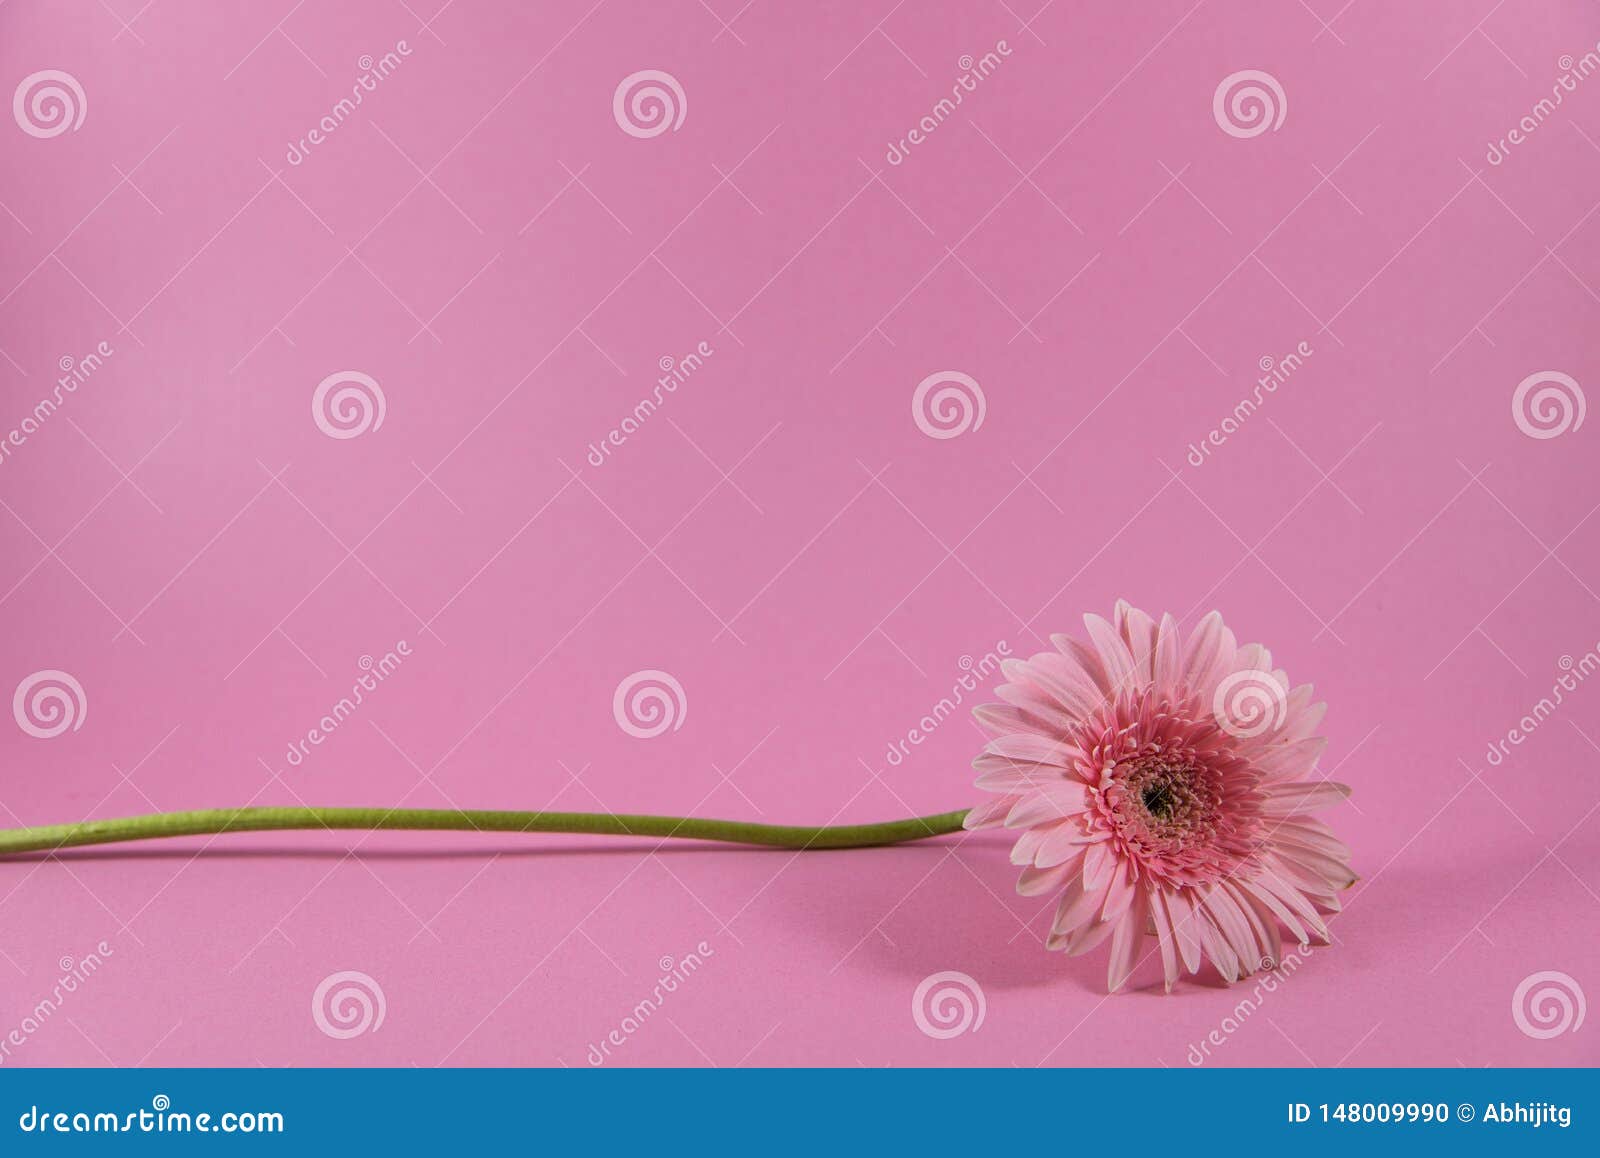 Flower Desktop Wallpaper Images  Browse 3661999 Stock Photos Vectors  and Video  Adobe Stock